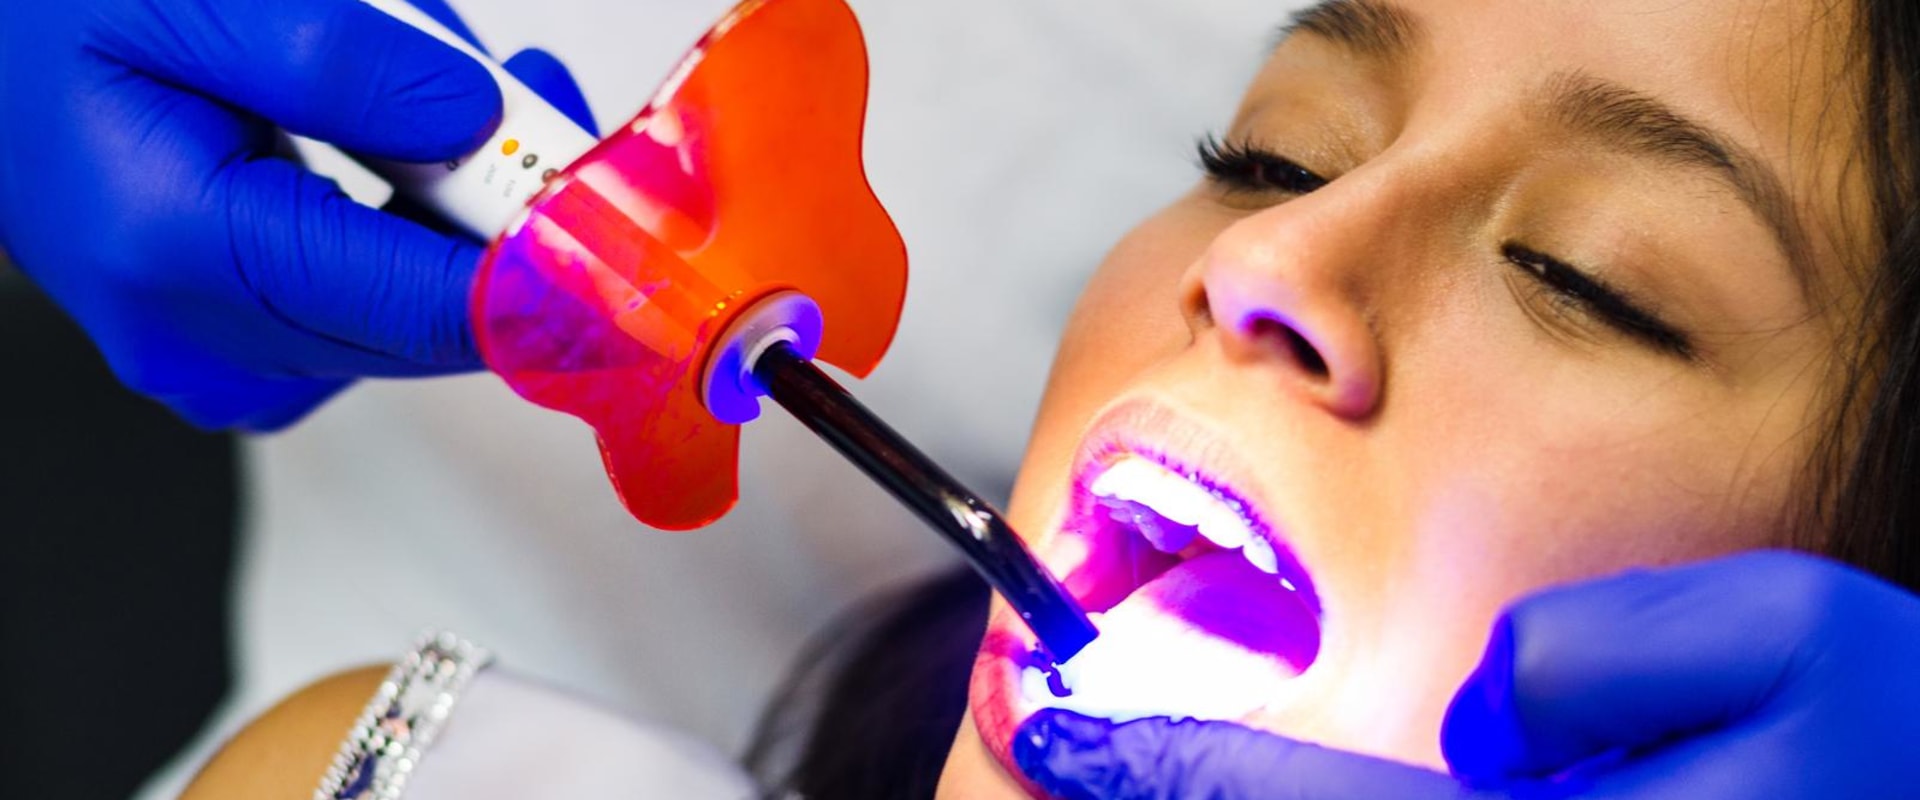 The Benefits Of Laser Dentistry: A Guide To Laser Gum Treatment In Austin, TX